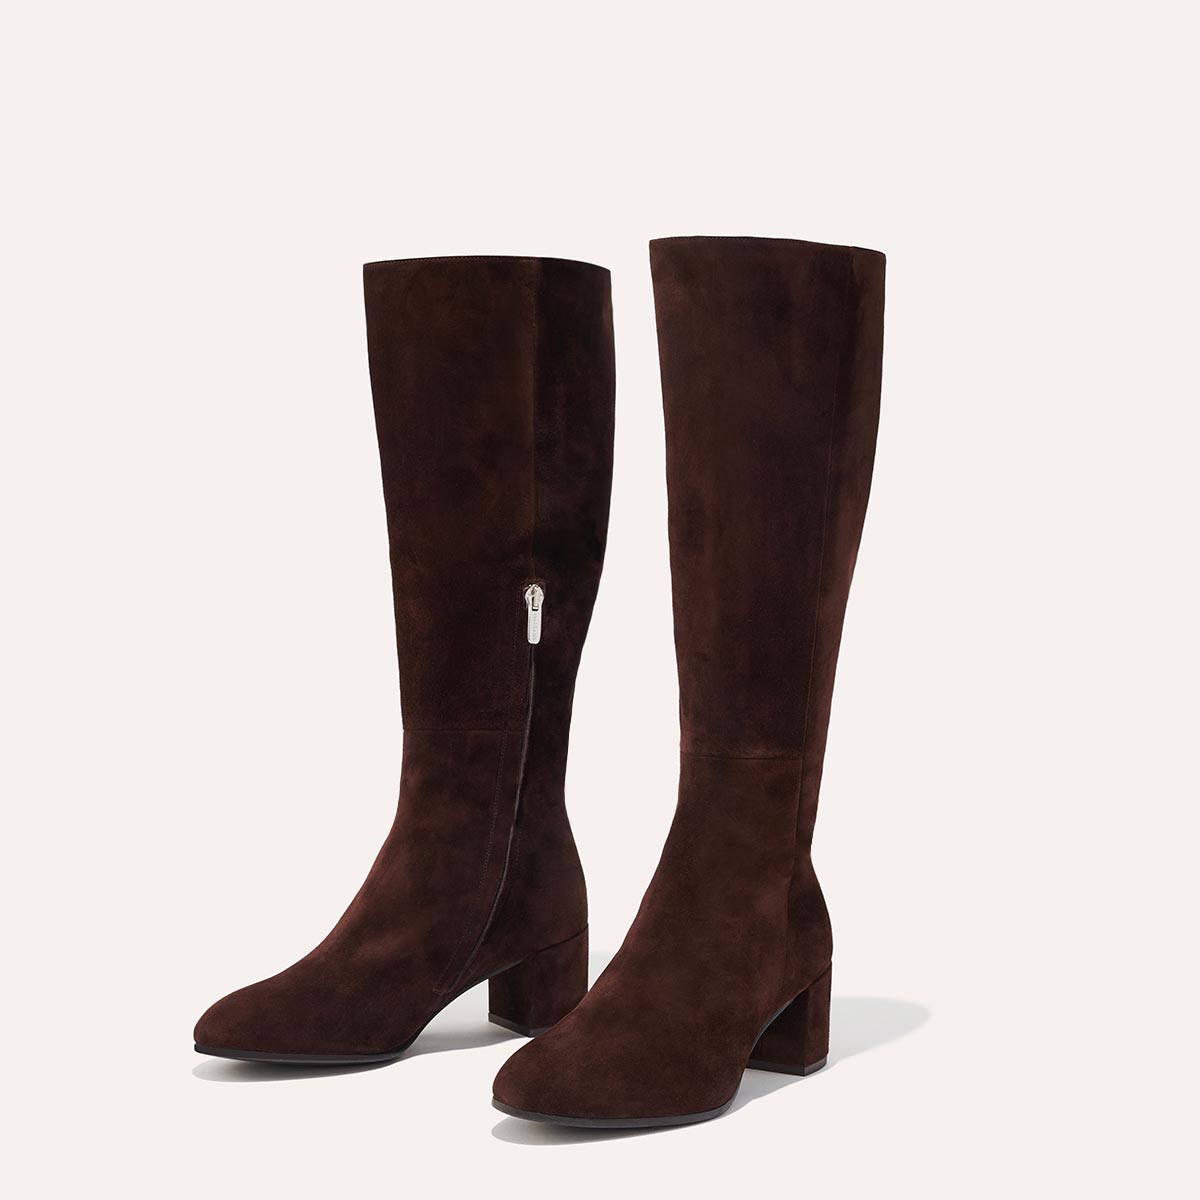 The Edie Boot - Chocolate Suede